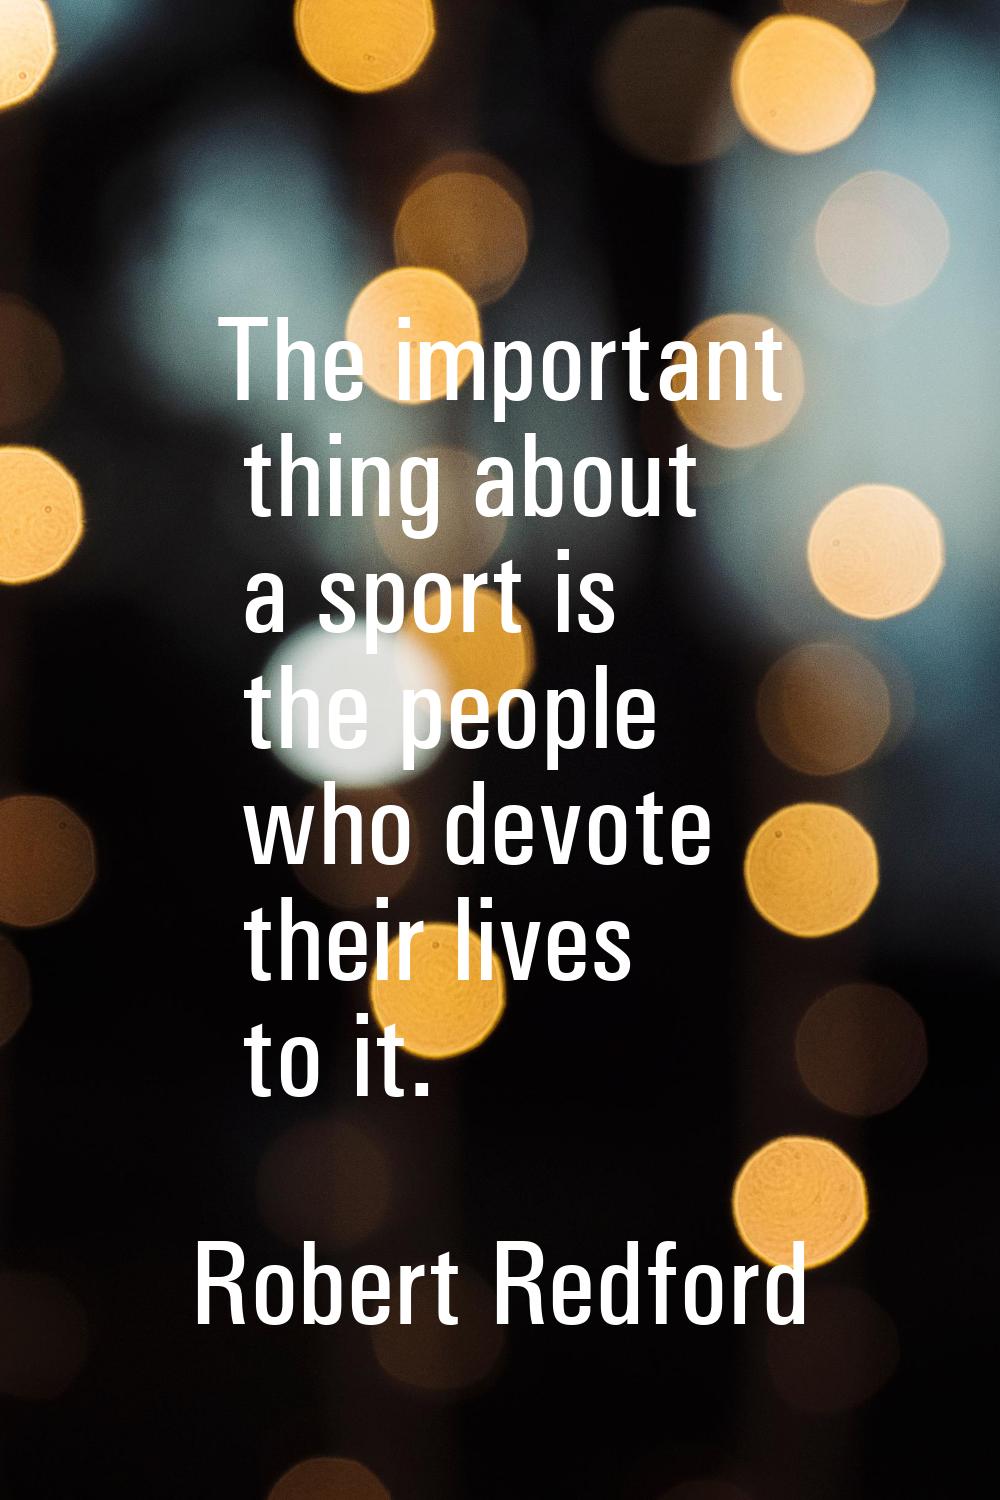 The important thing about a sport is the people who devote their lives to it.